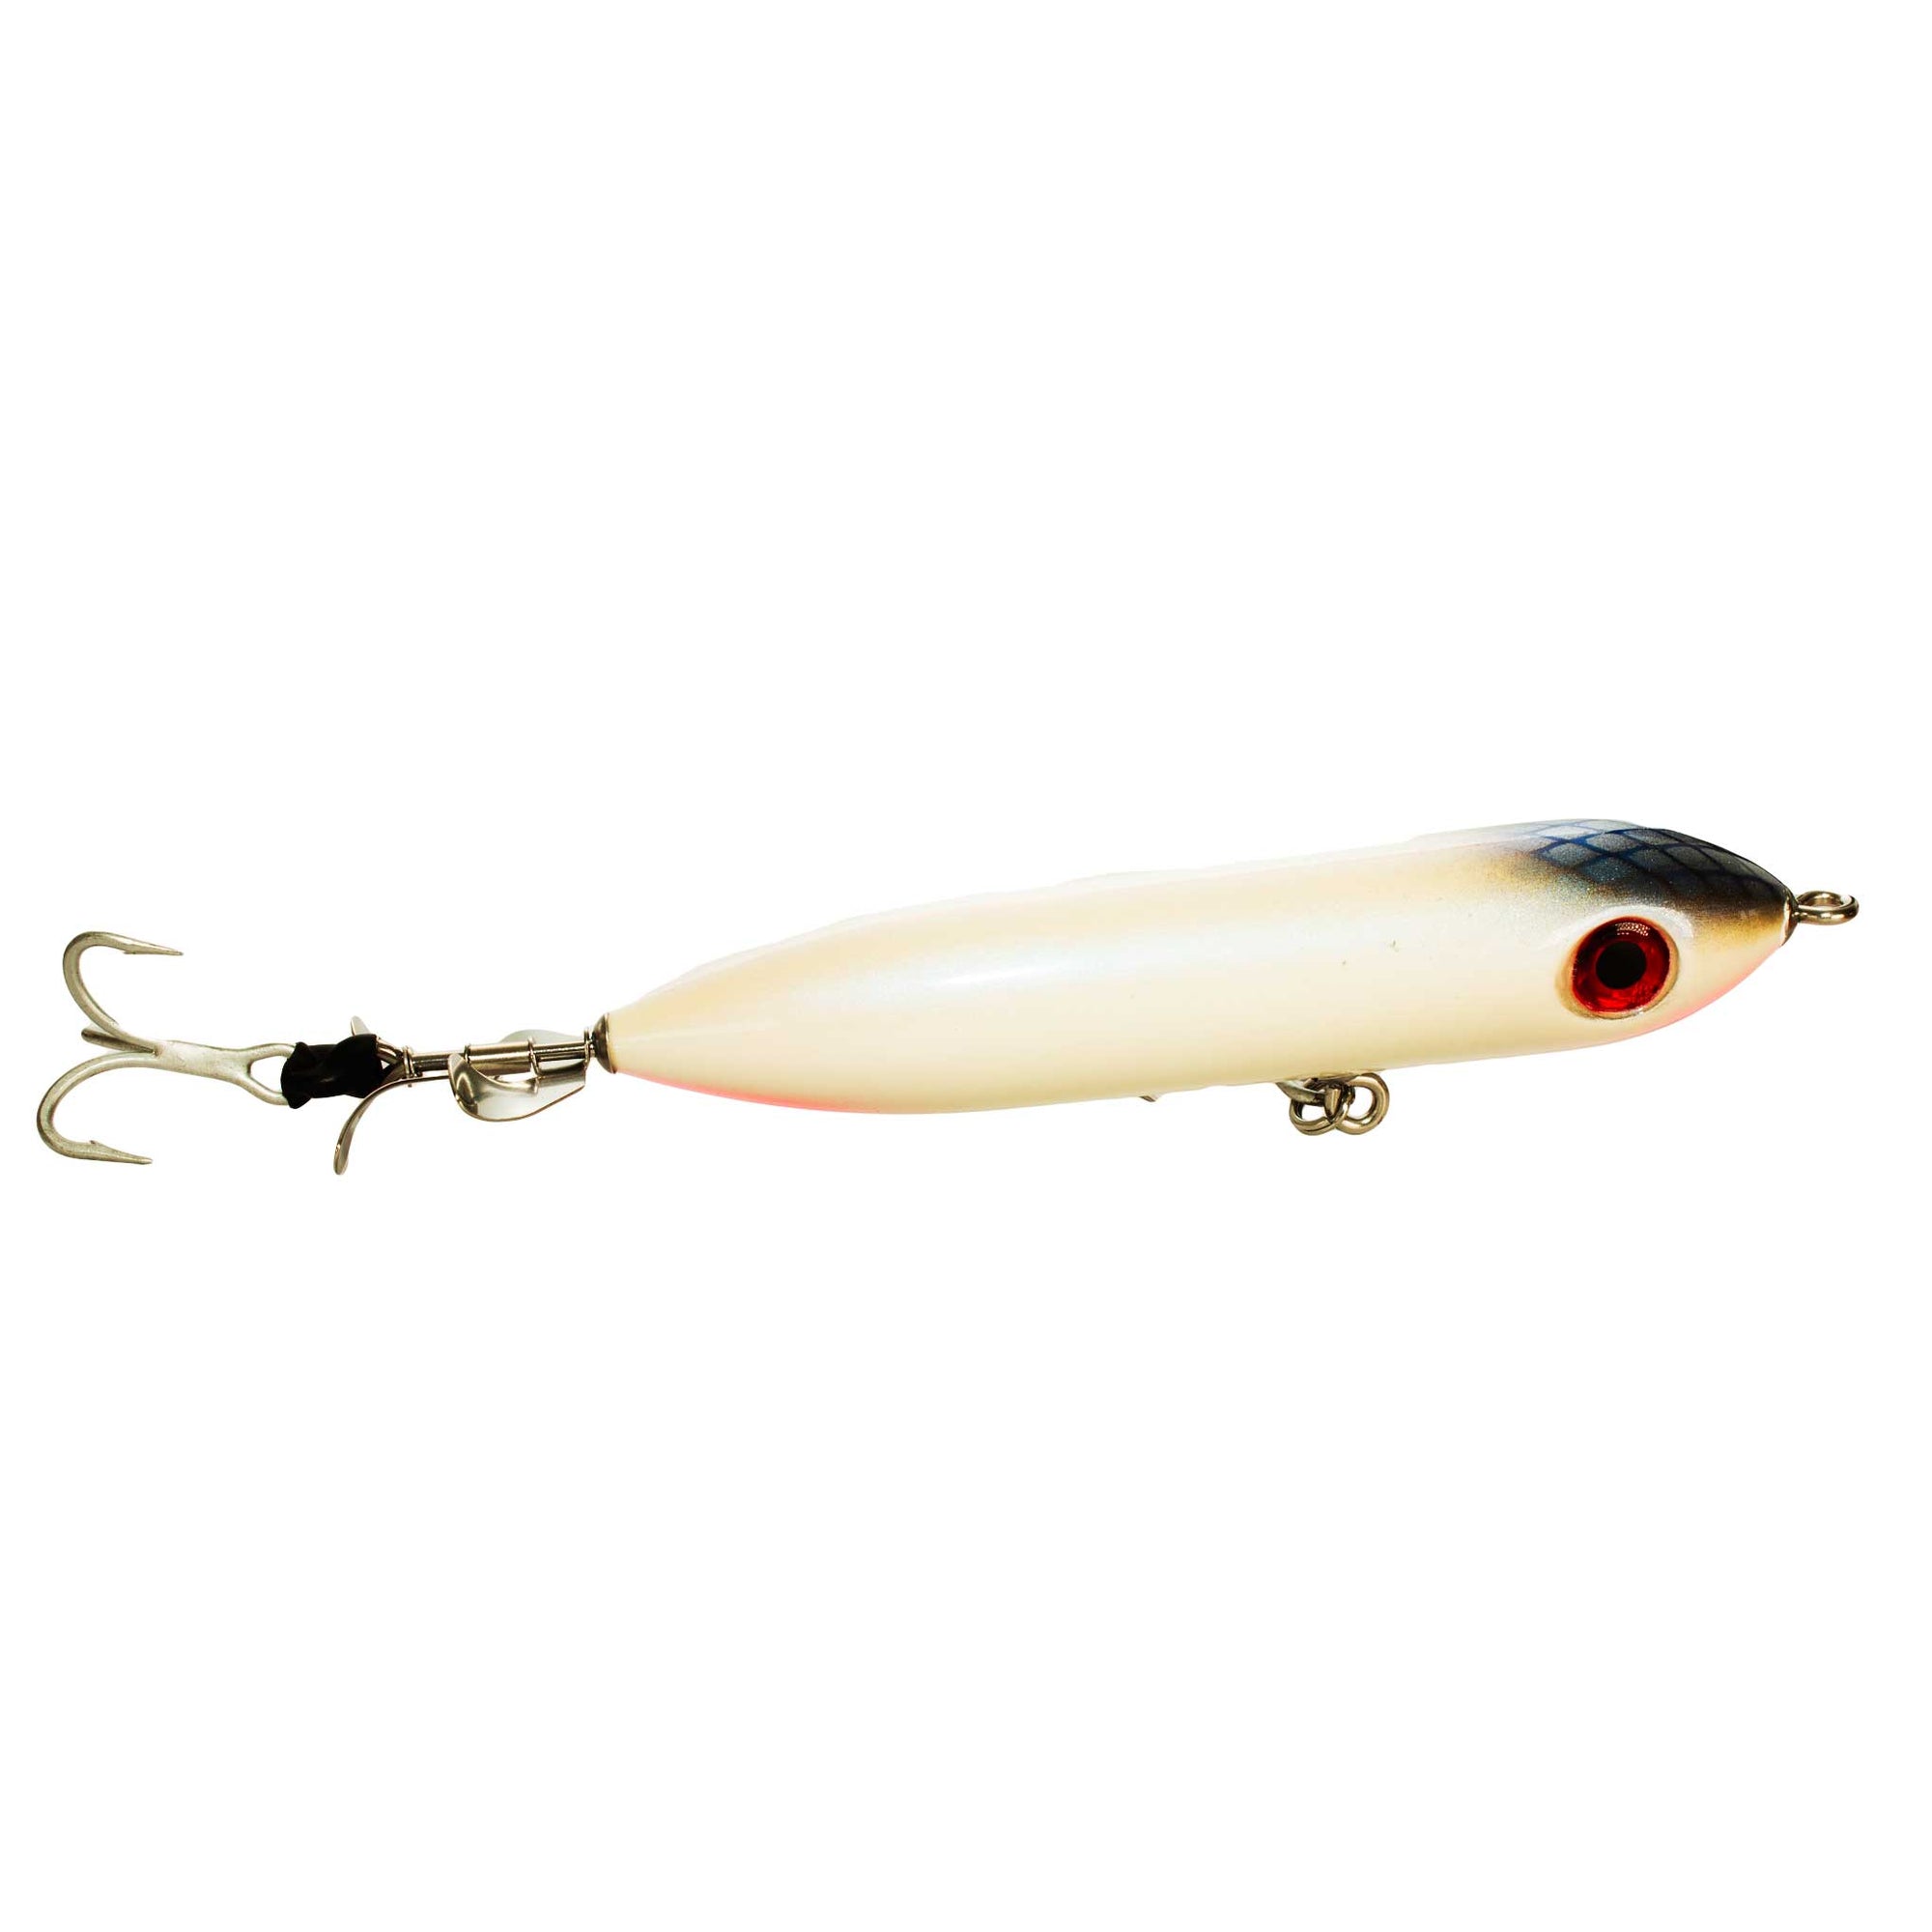 Rotty Fizzer - 70mm - Old Dog Lures - Australian Born + Bred!